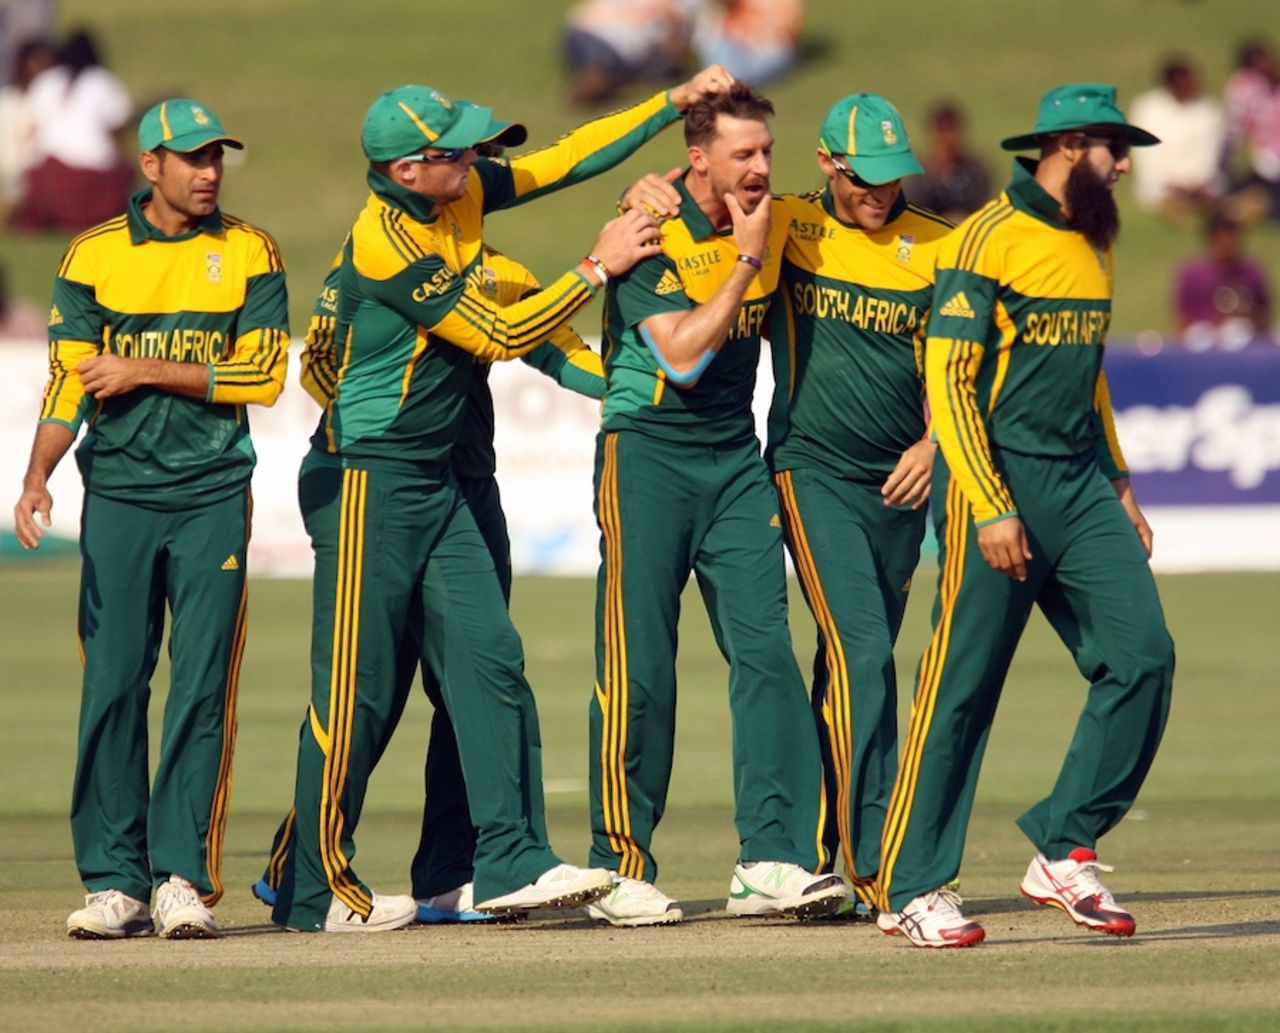 Dale Steyn is congratulated in a unique way after a wicket, Zimbabwe v South Africa, tri-series, Harare, August 29, 2014